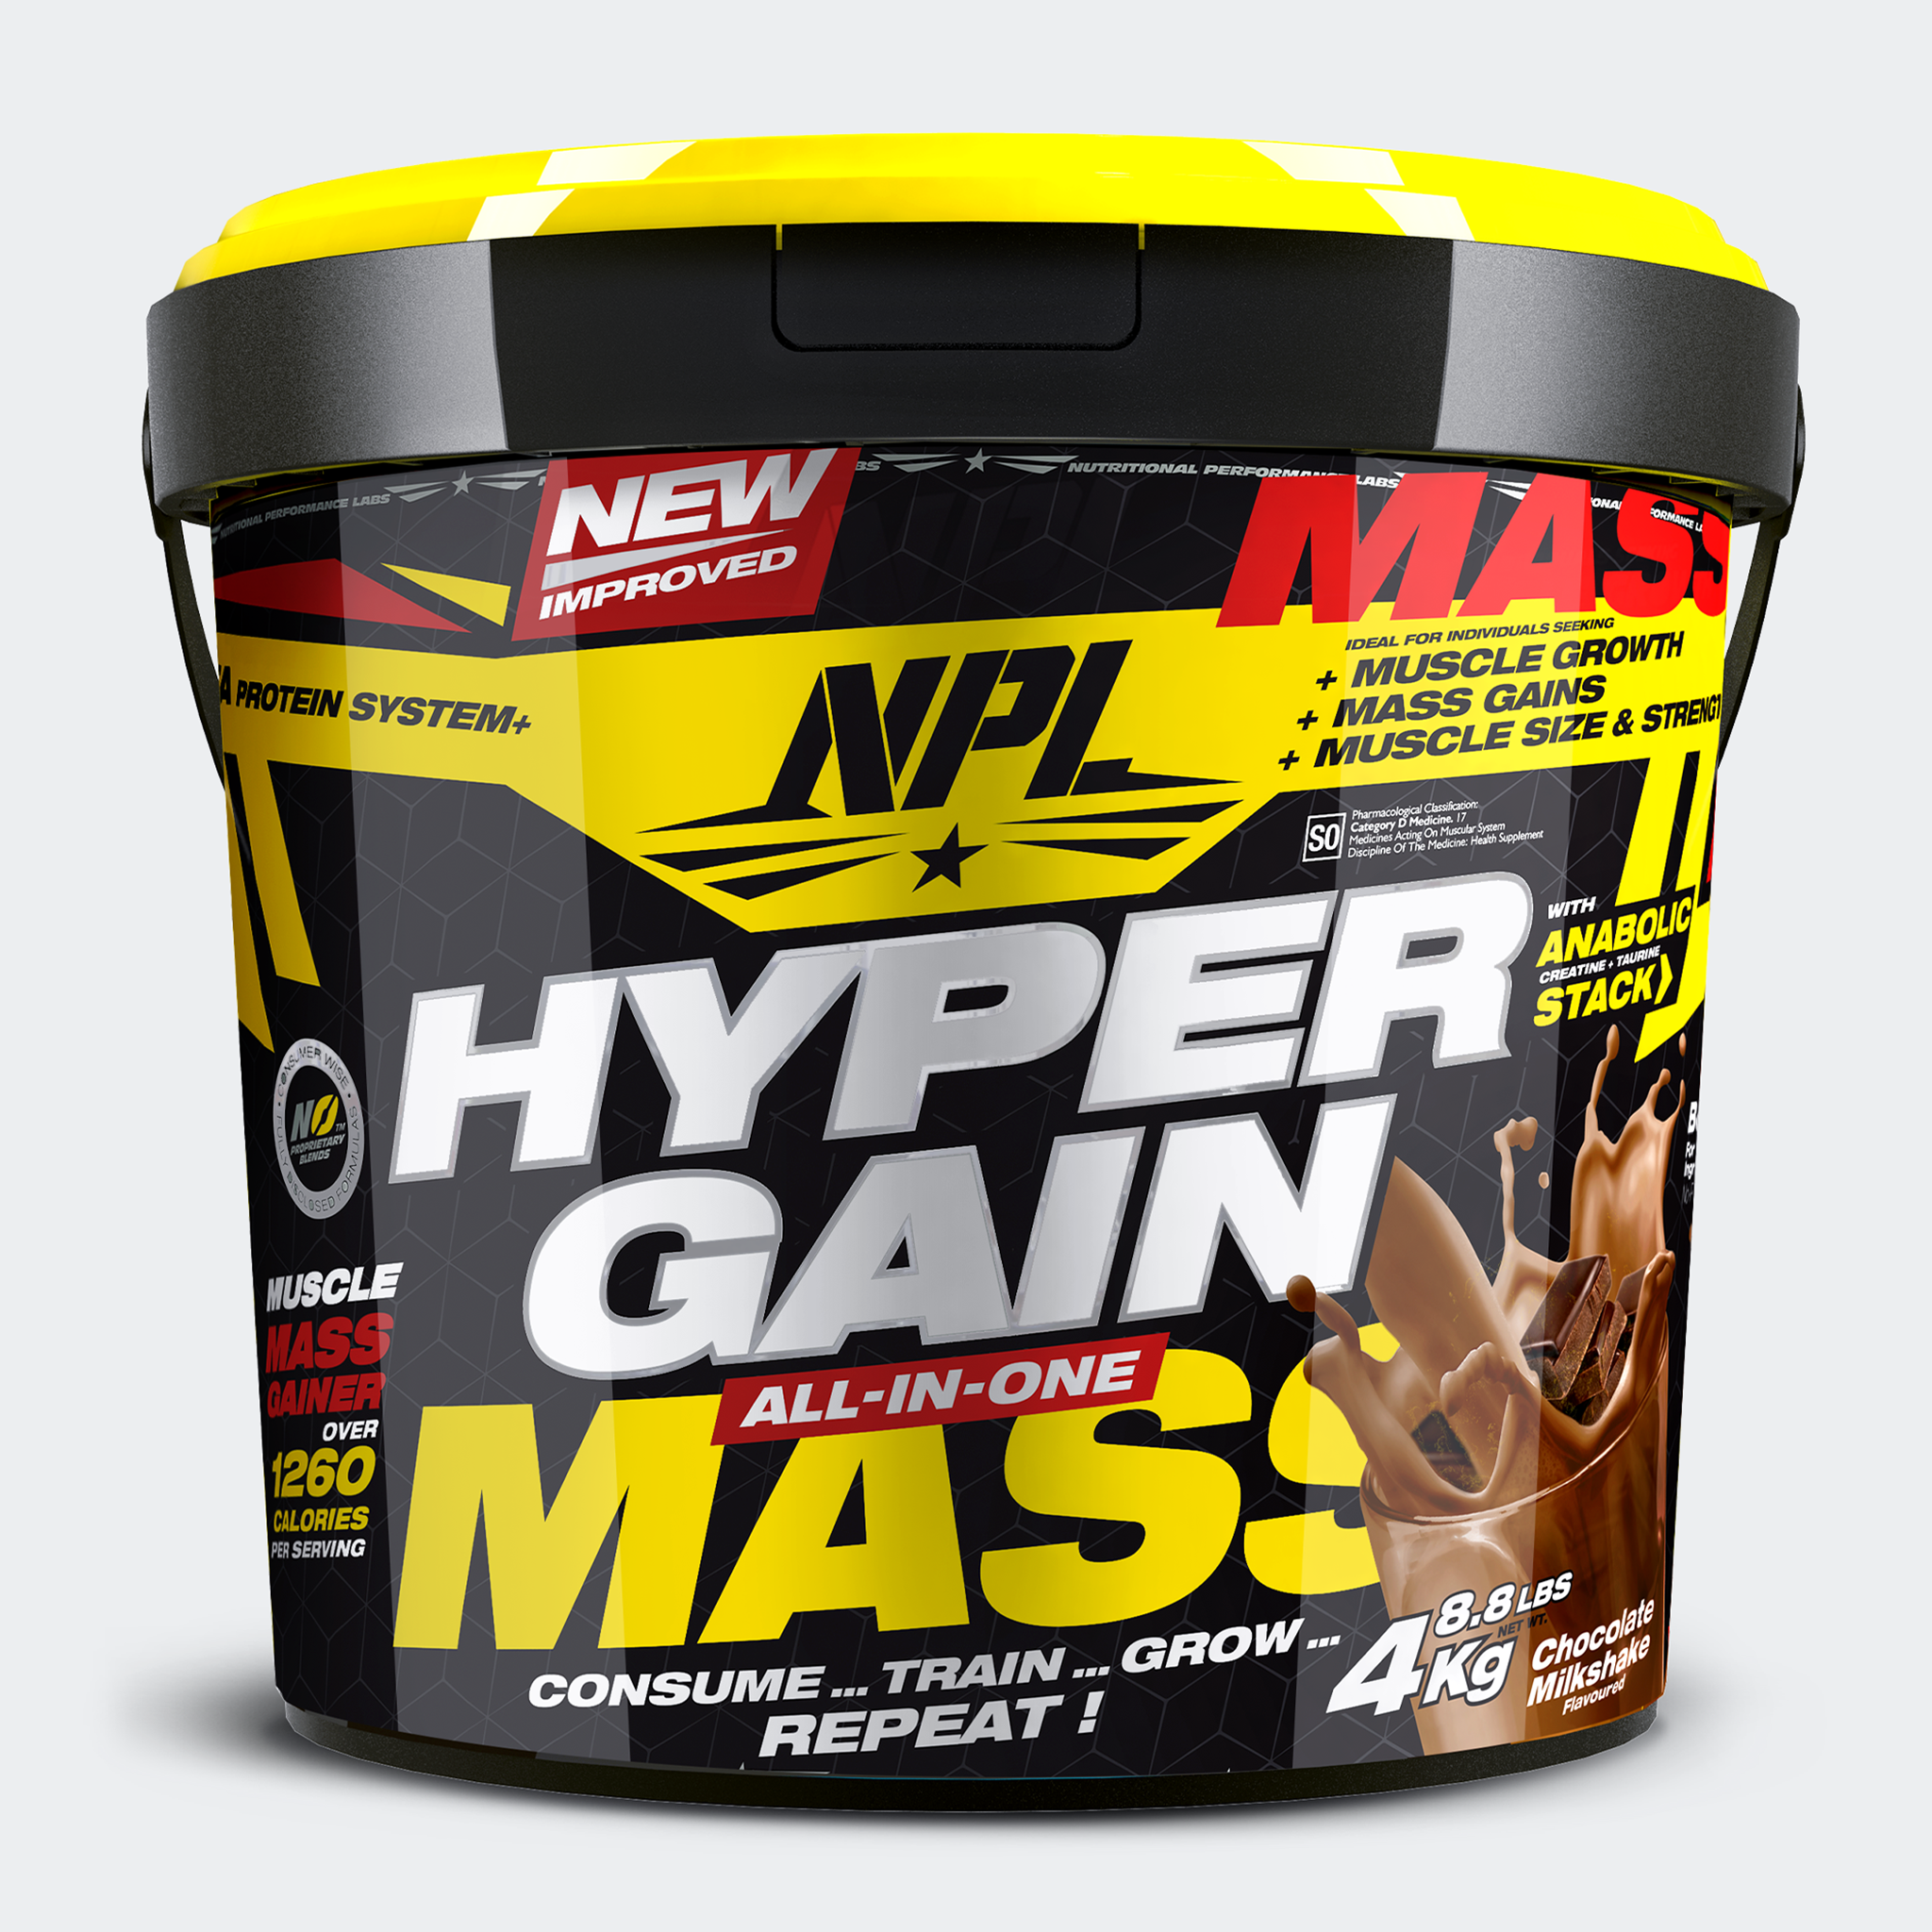 NPL hyper gain for hard gainers all-in-one mass gainer